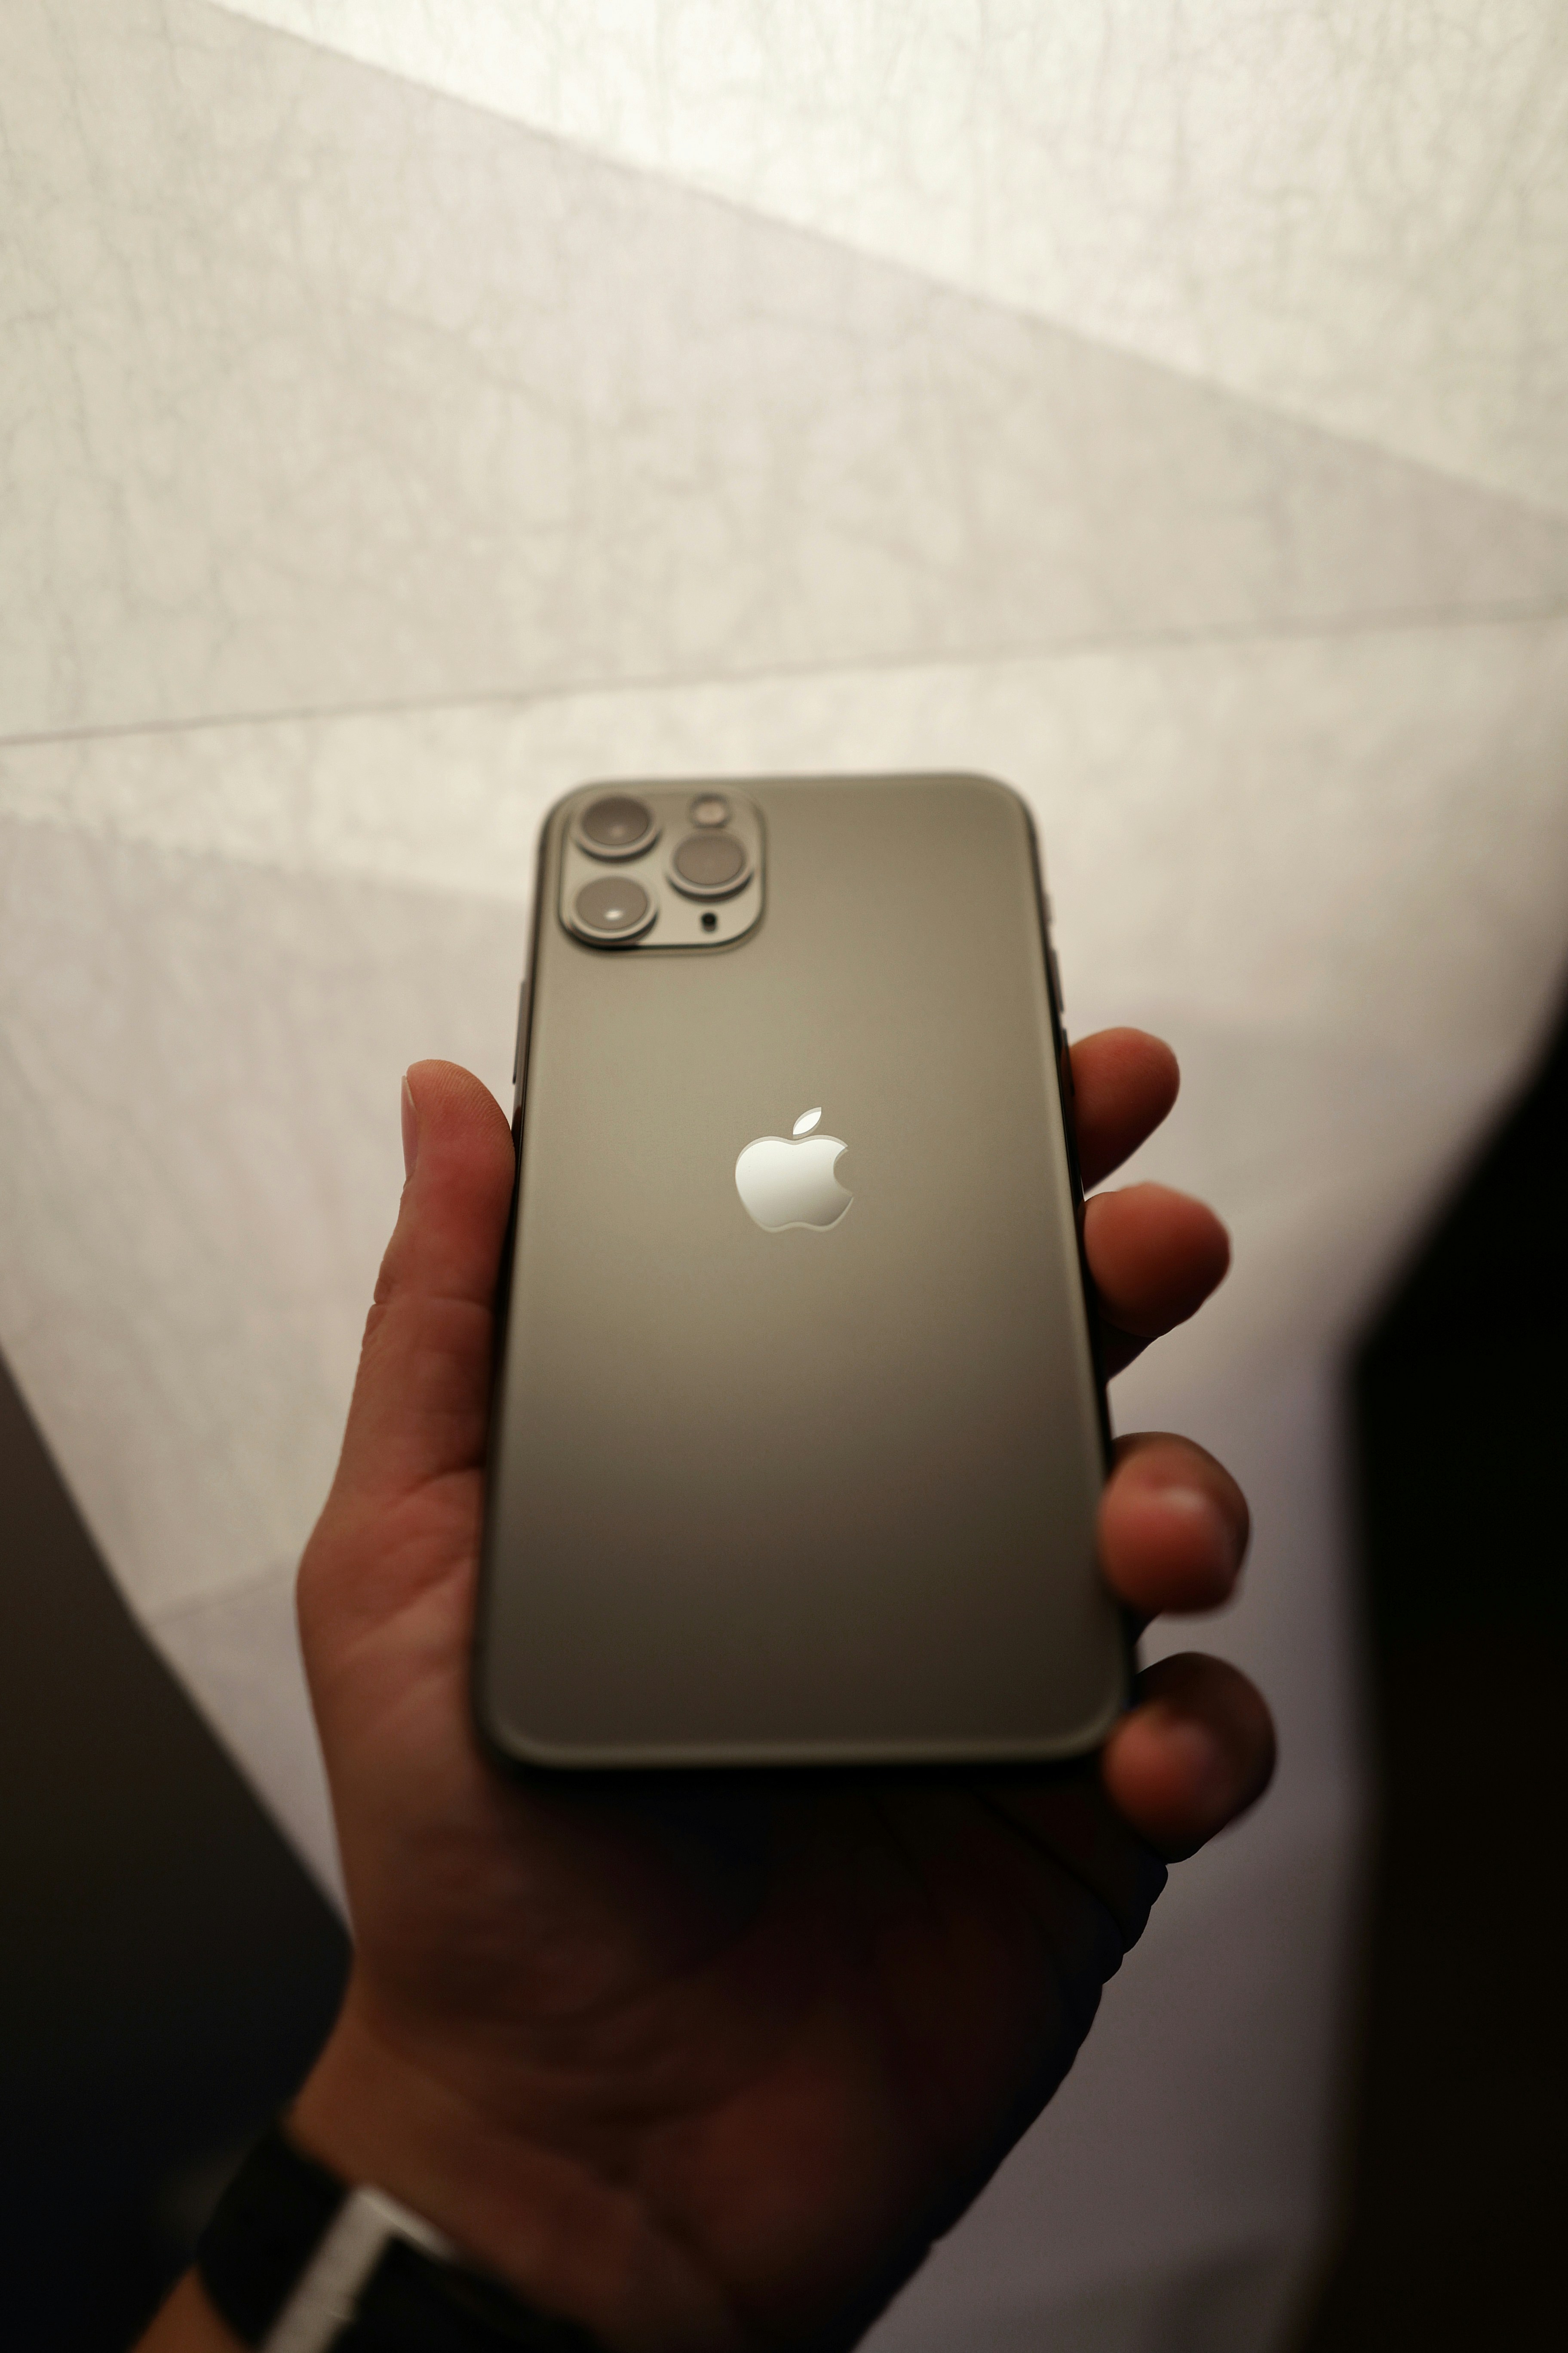 © pixelperfektion - thank you, for crediting and supporting us! Shot from the back of the all new iPhone 11 Pro from Apple.